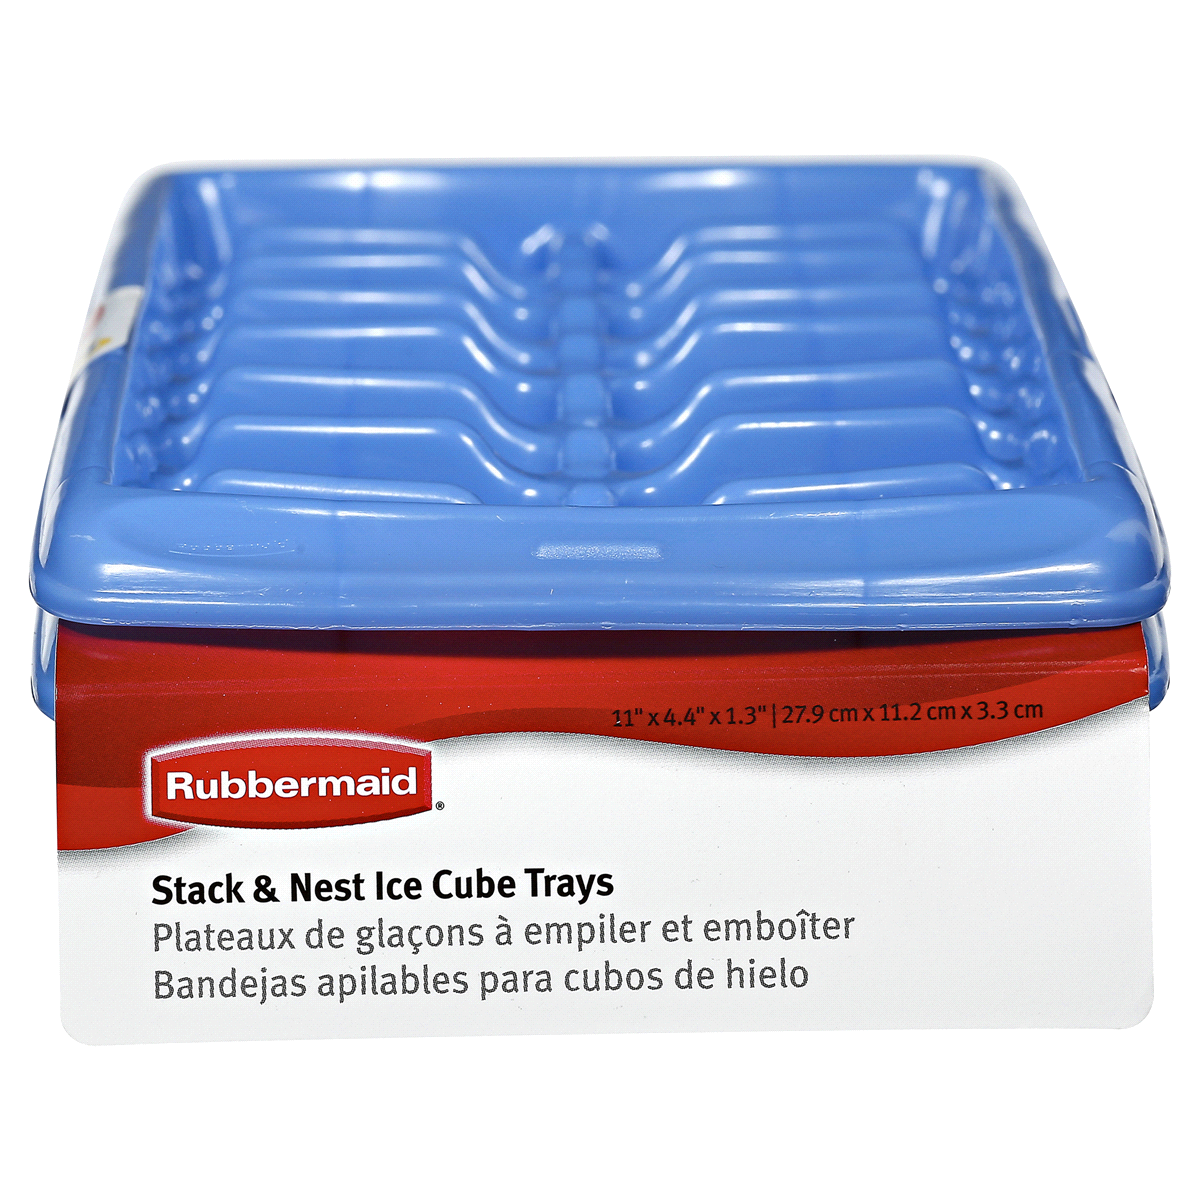 Rubbermaid Ice Cube Trays, Stack & Nest, Plastic Containers